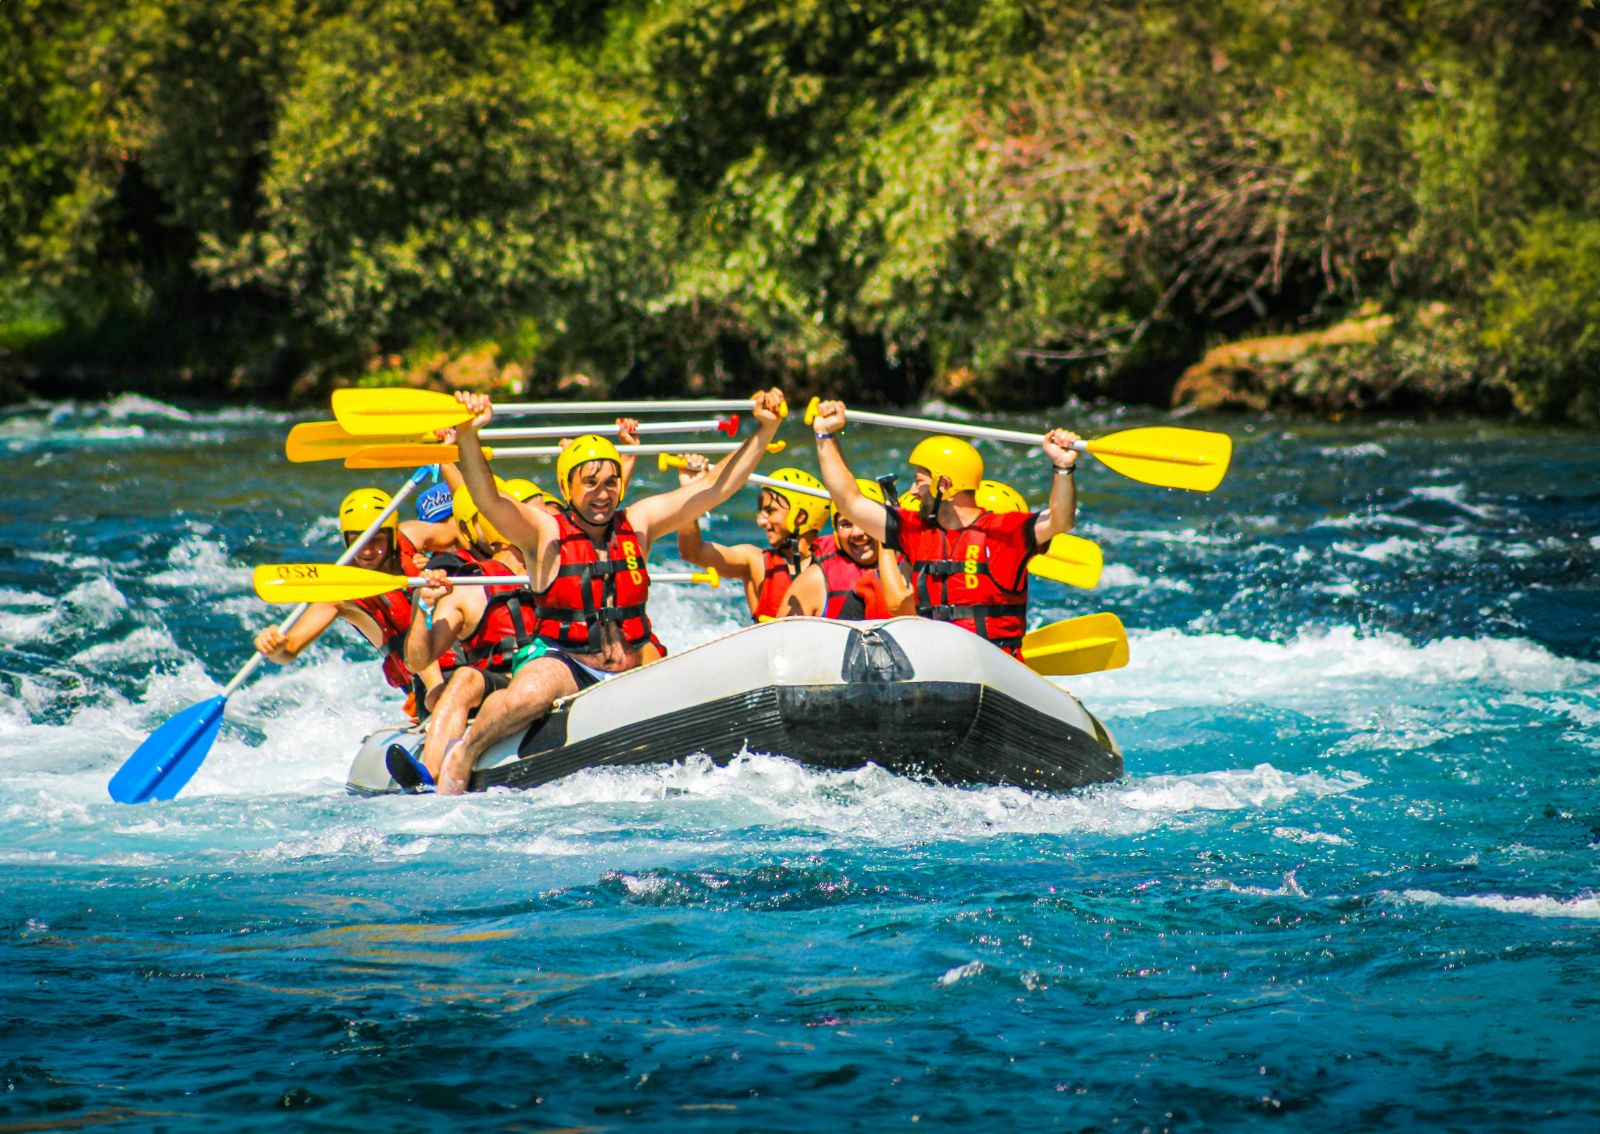 A group of people rafting on the Seti River